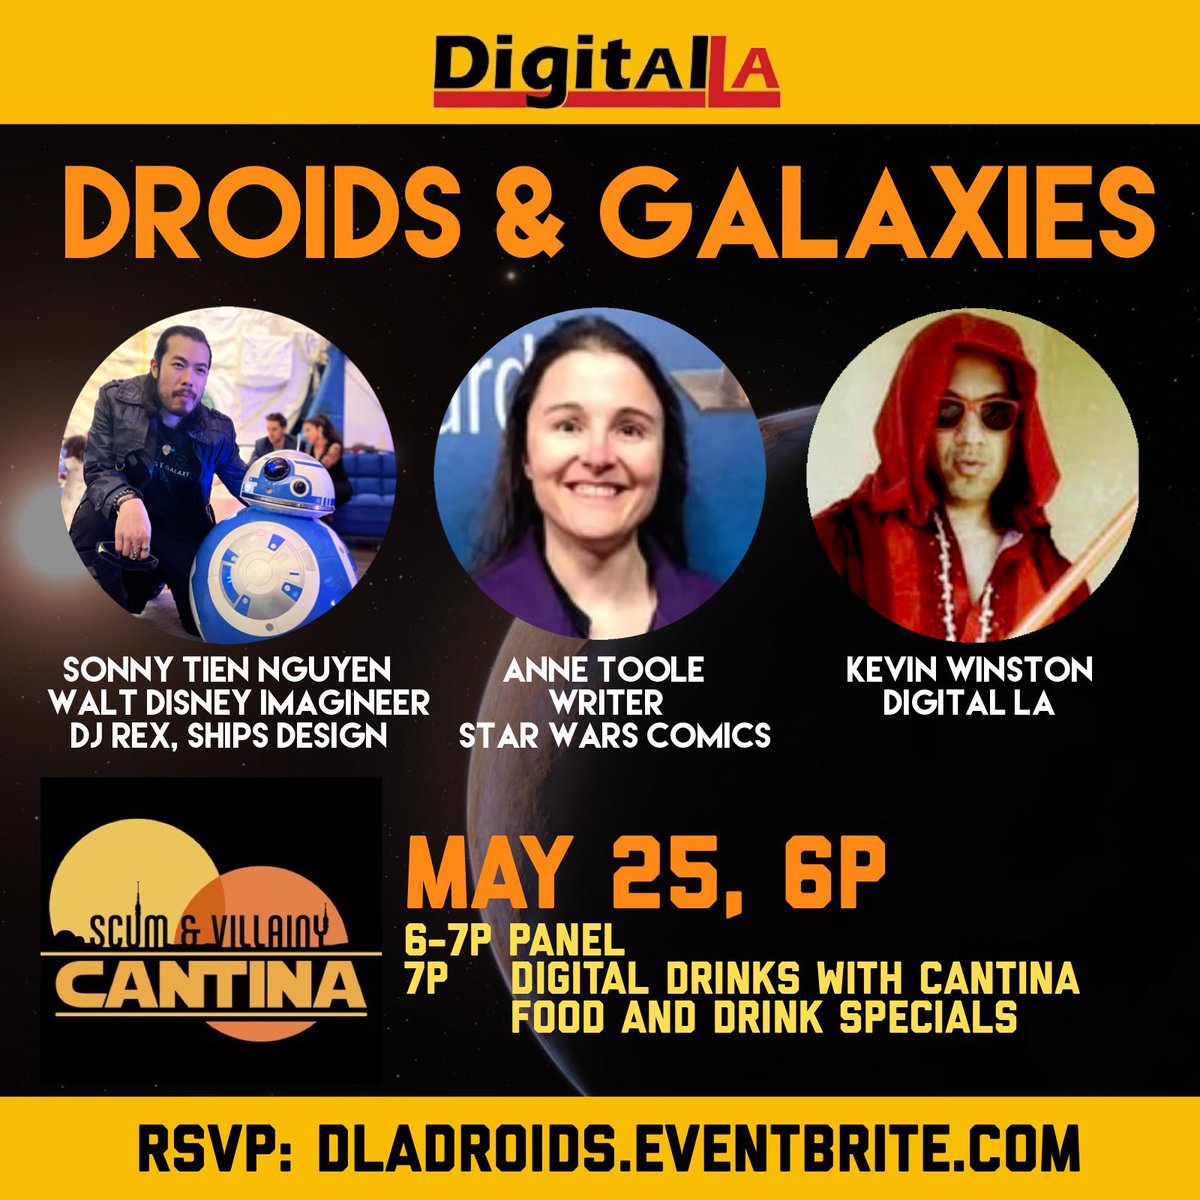 Happy Star Wars 45th anniversary! Star Wars premiered May 25, 1977. Celebrate with our Droids & Galaxies panel today May 25, 2022 w speakers who worked on Star Wars at Disneyland and Star Wars comic books, at Scum & Villainy Cantina in Hollywood.

Register https://t.co/z8TO8H7tKC https://t.co/G49CVD82yS